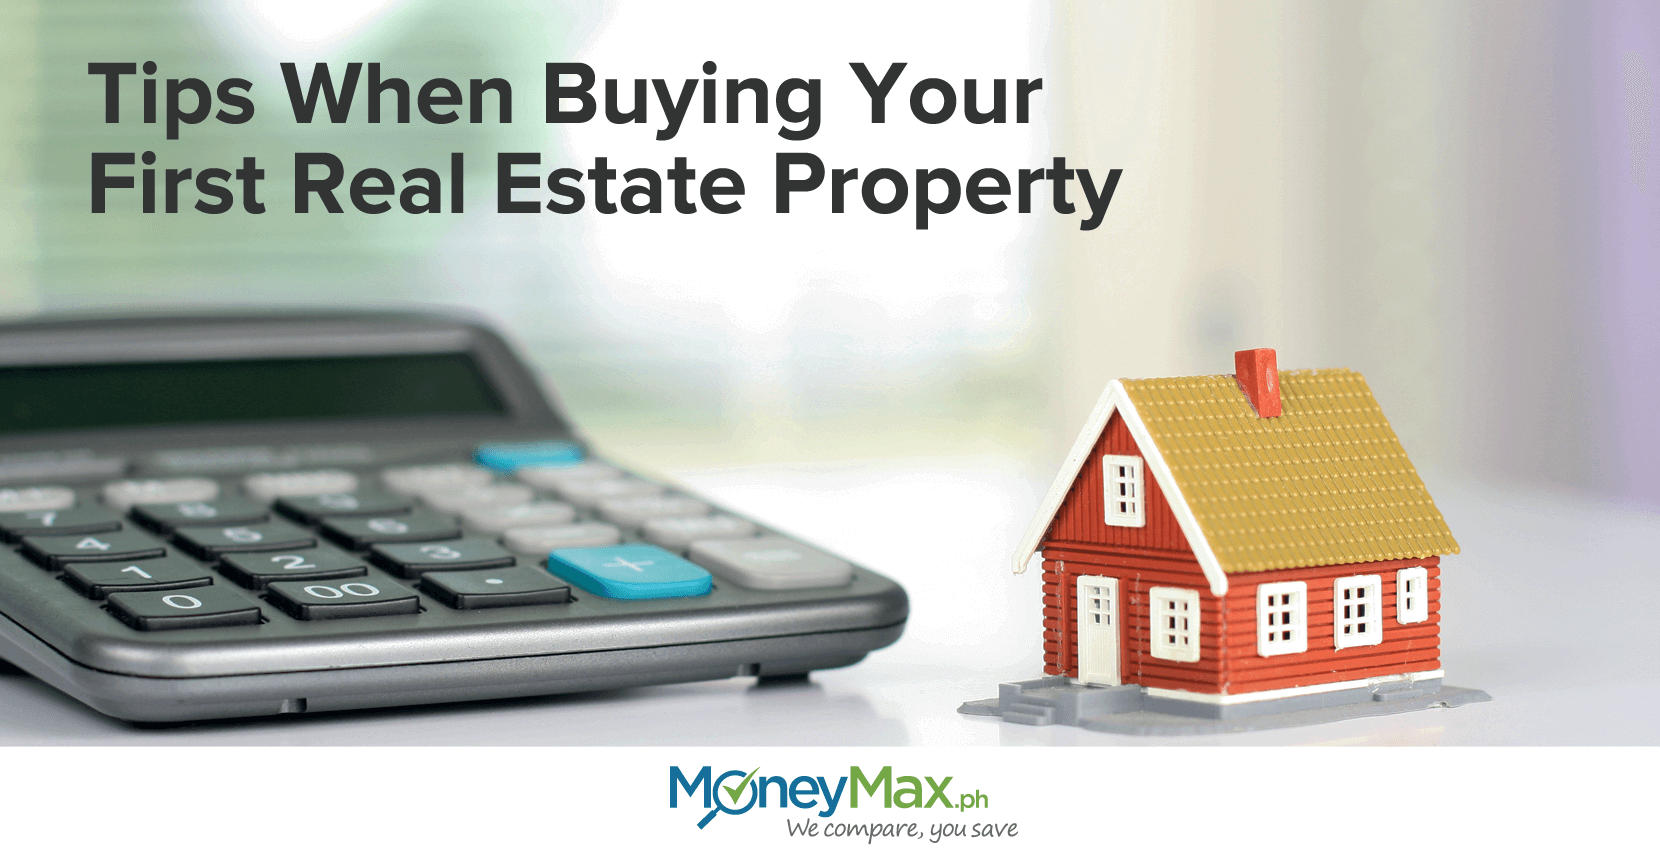 Tips when buying your first real estate property